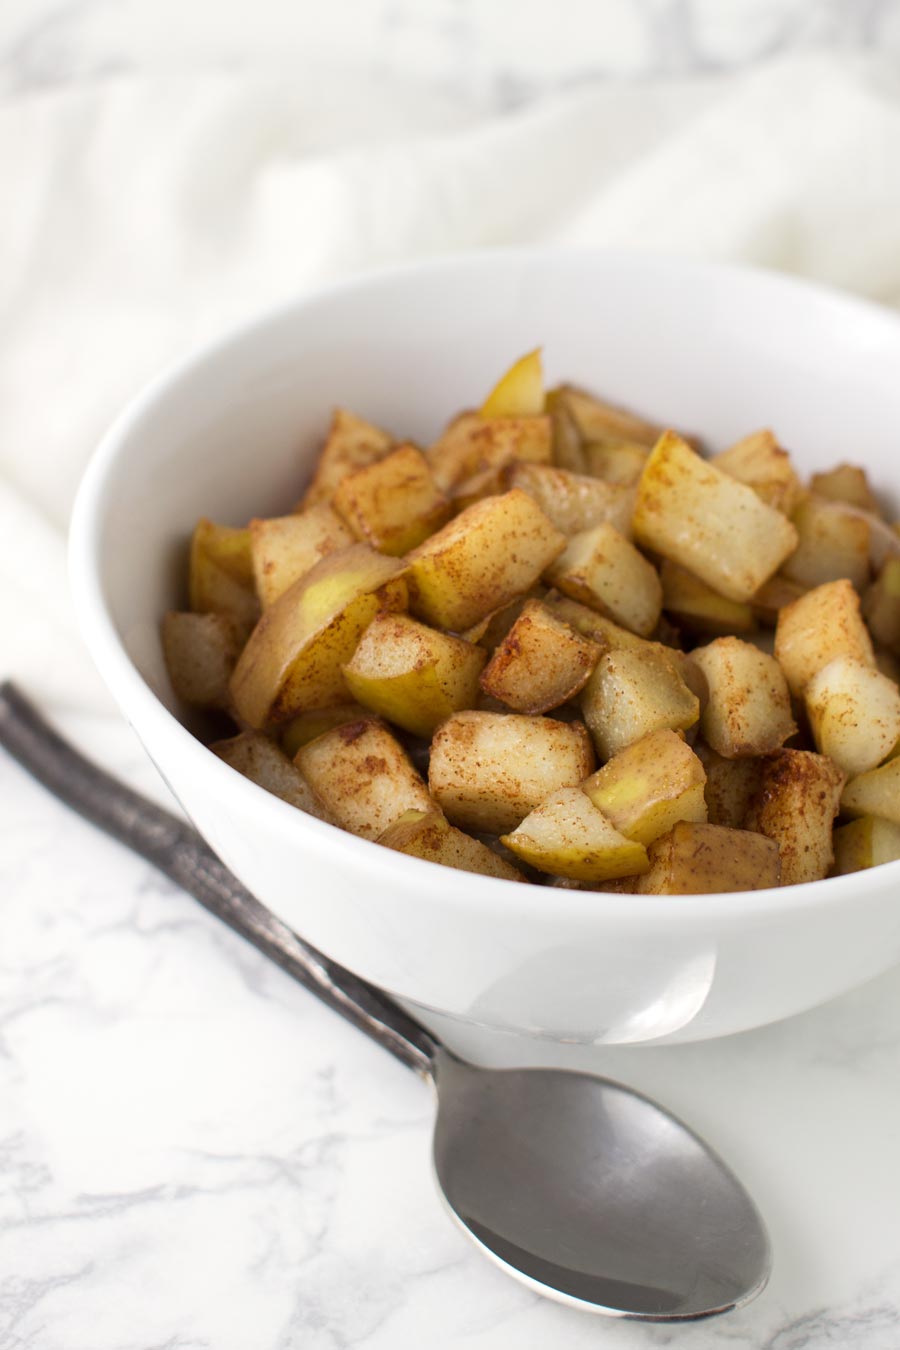 Cinnamon-Ginger Pears recipe from acleanplate.com #paleo #aip #glutenfree